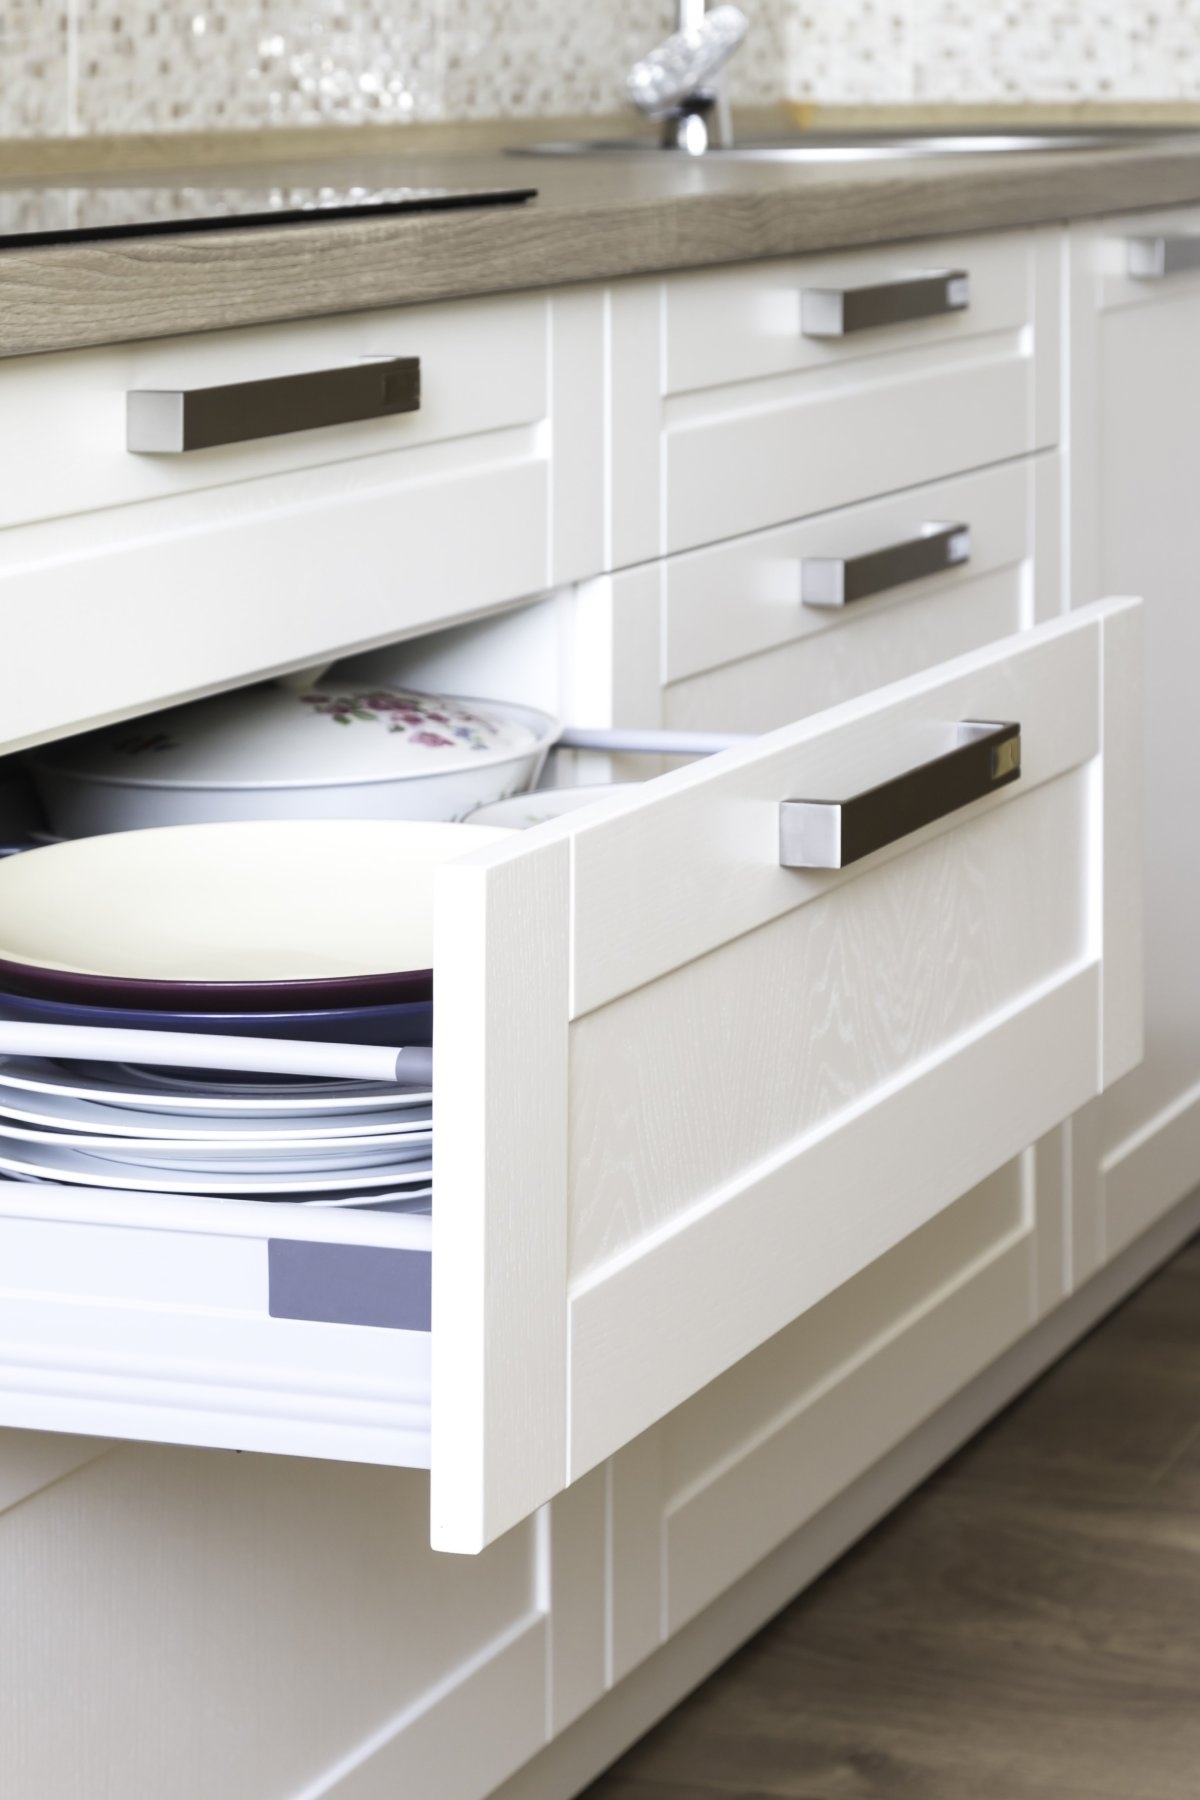 image showing drawers with soft-close hinges